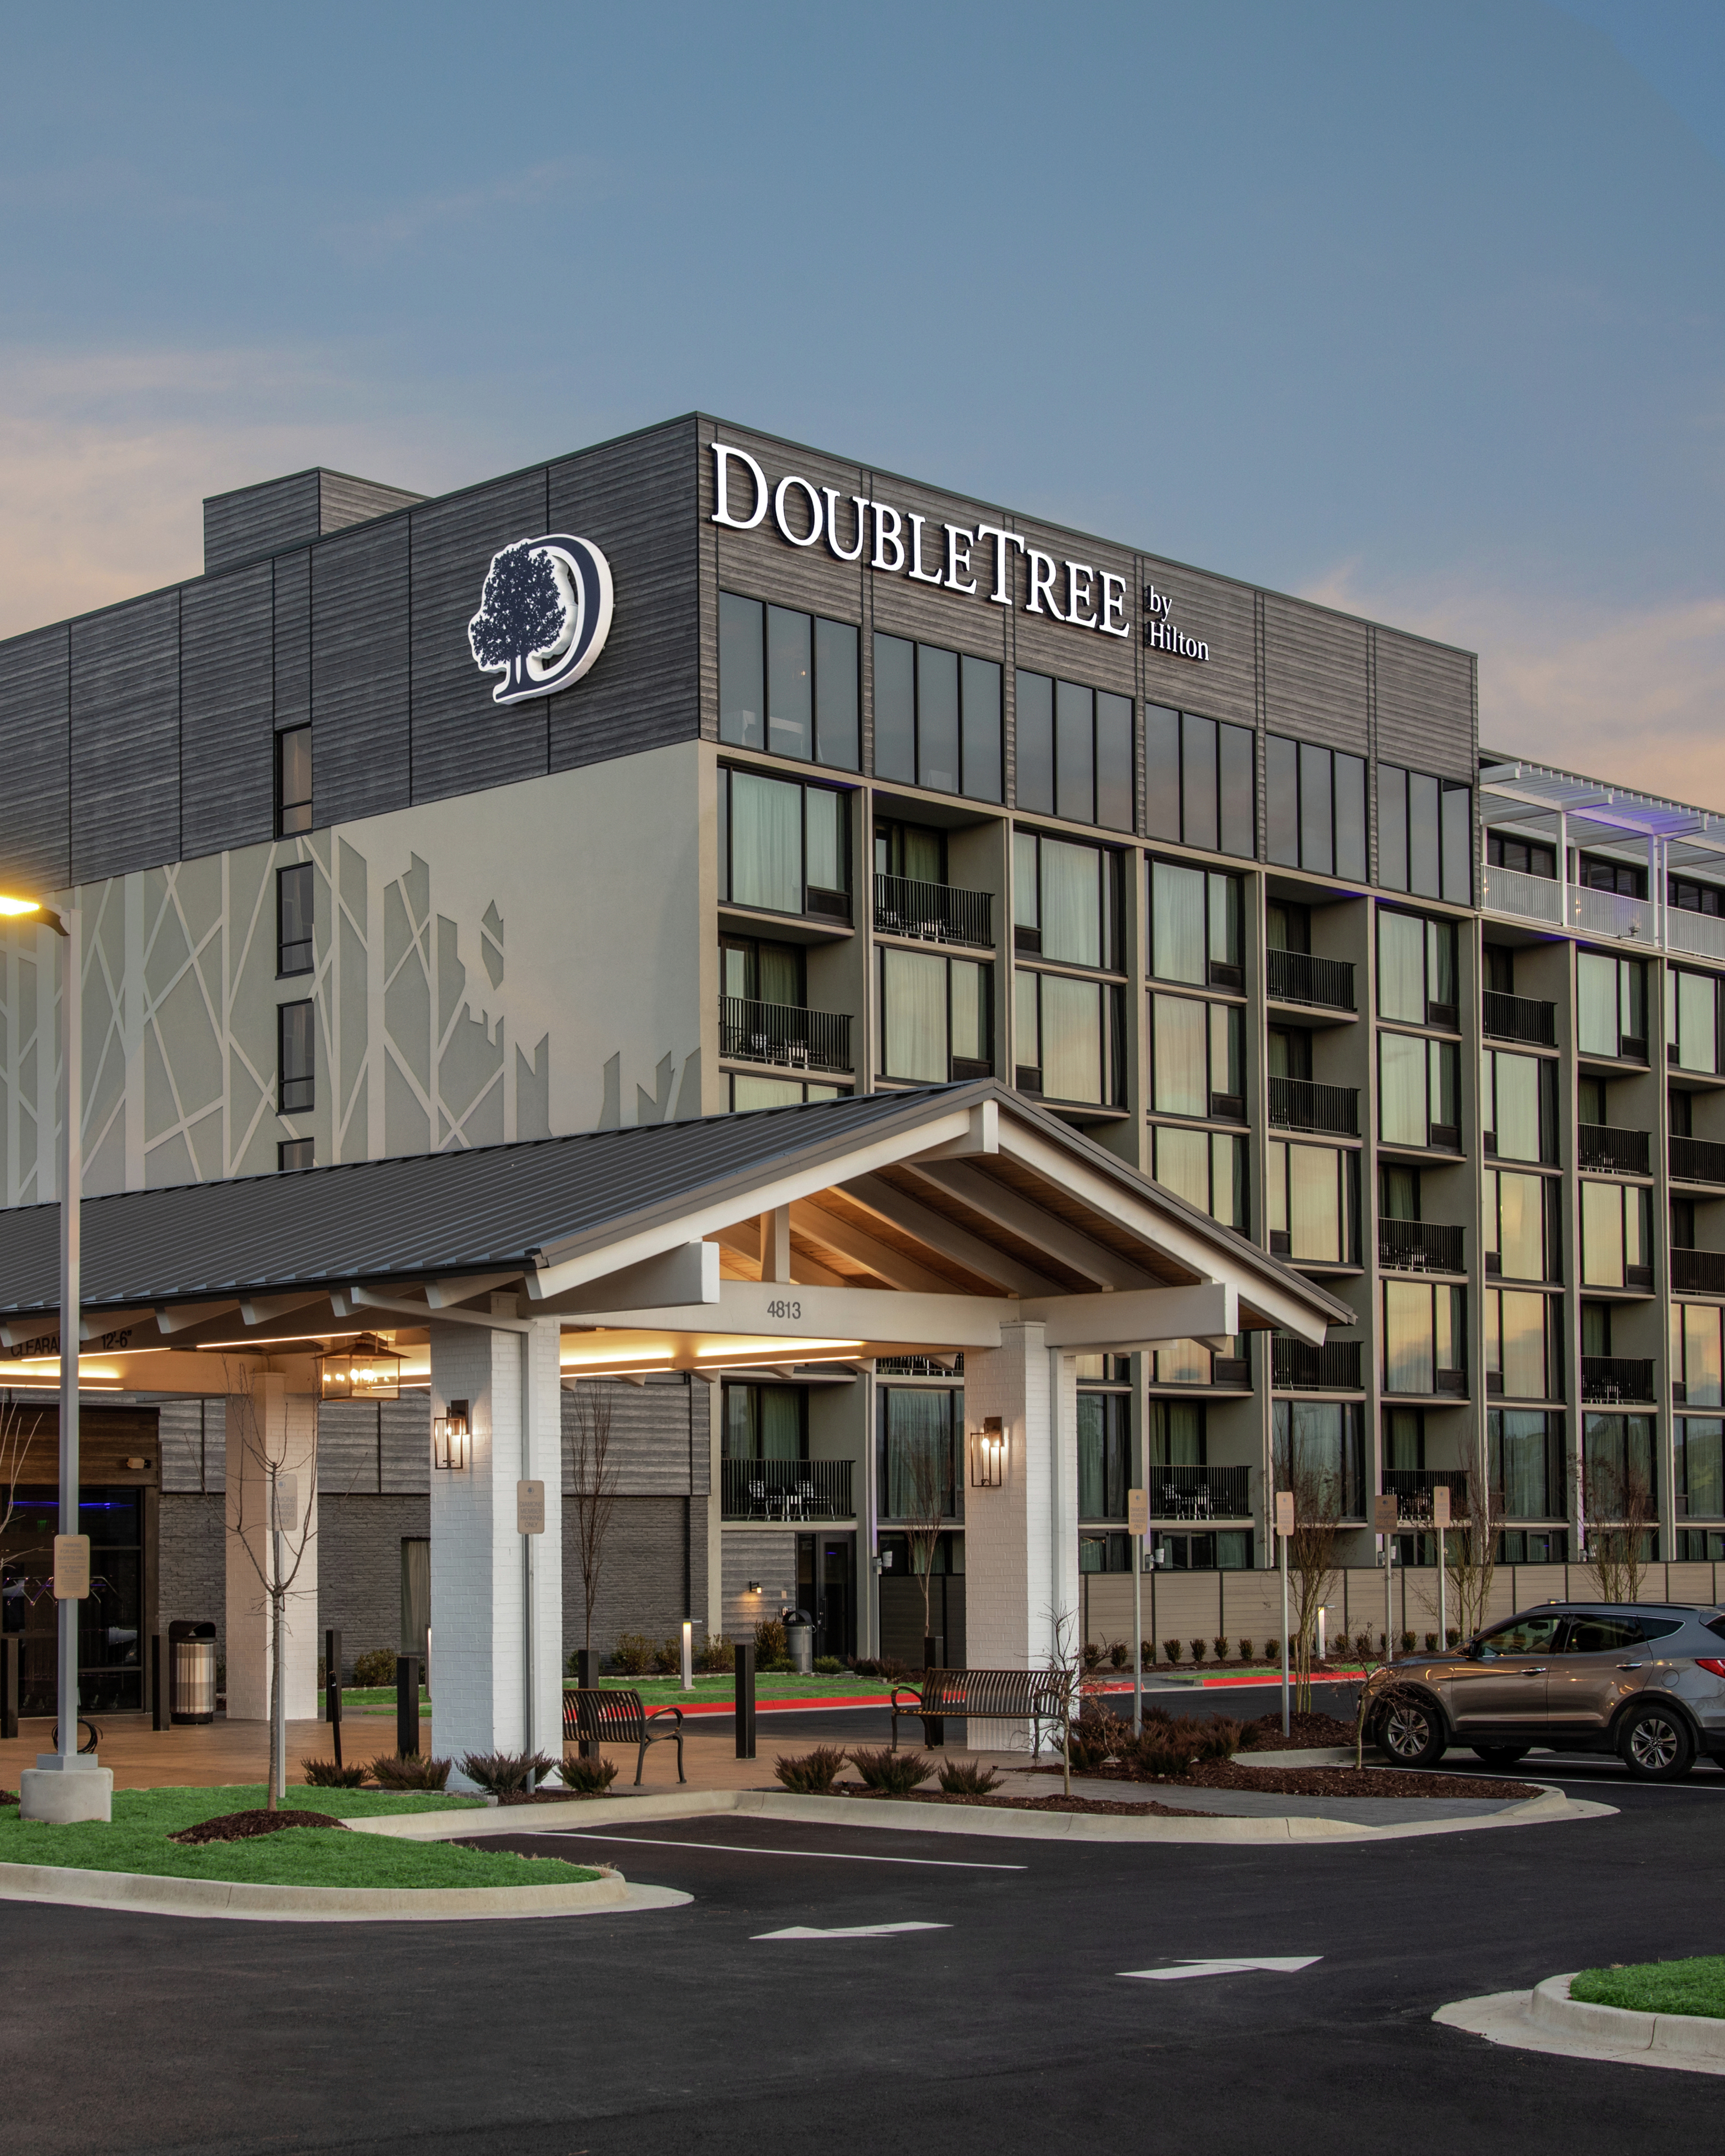 Exterior Entrance of DoubleTree Hotel